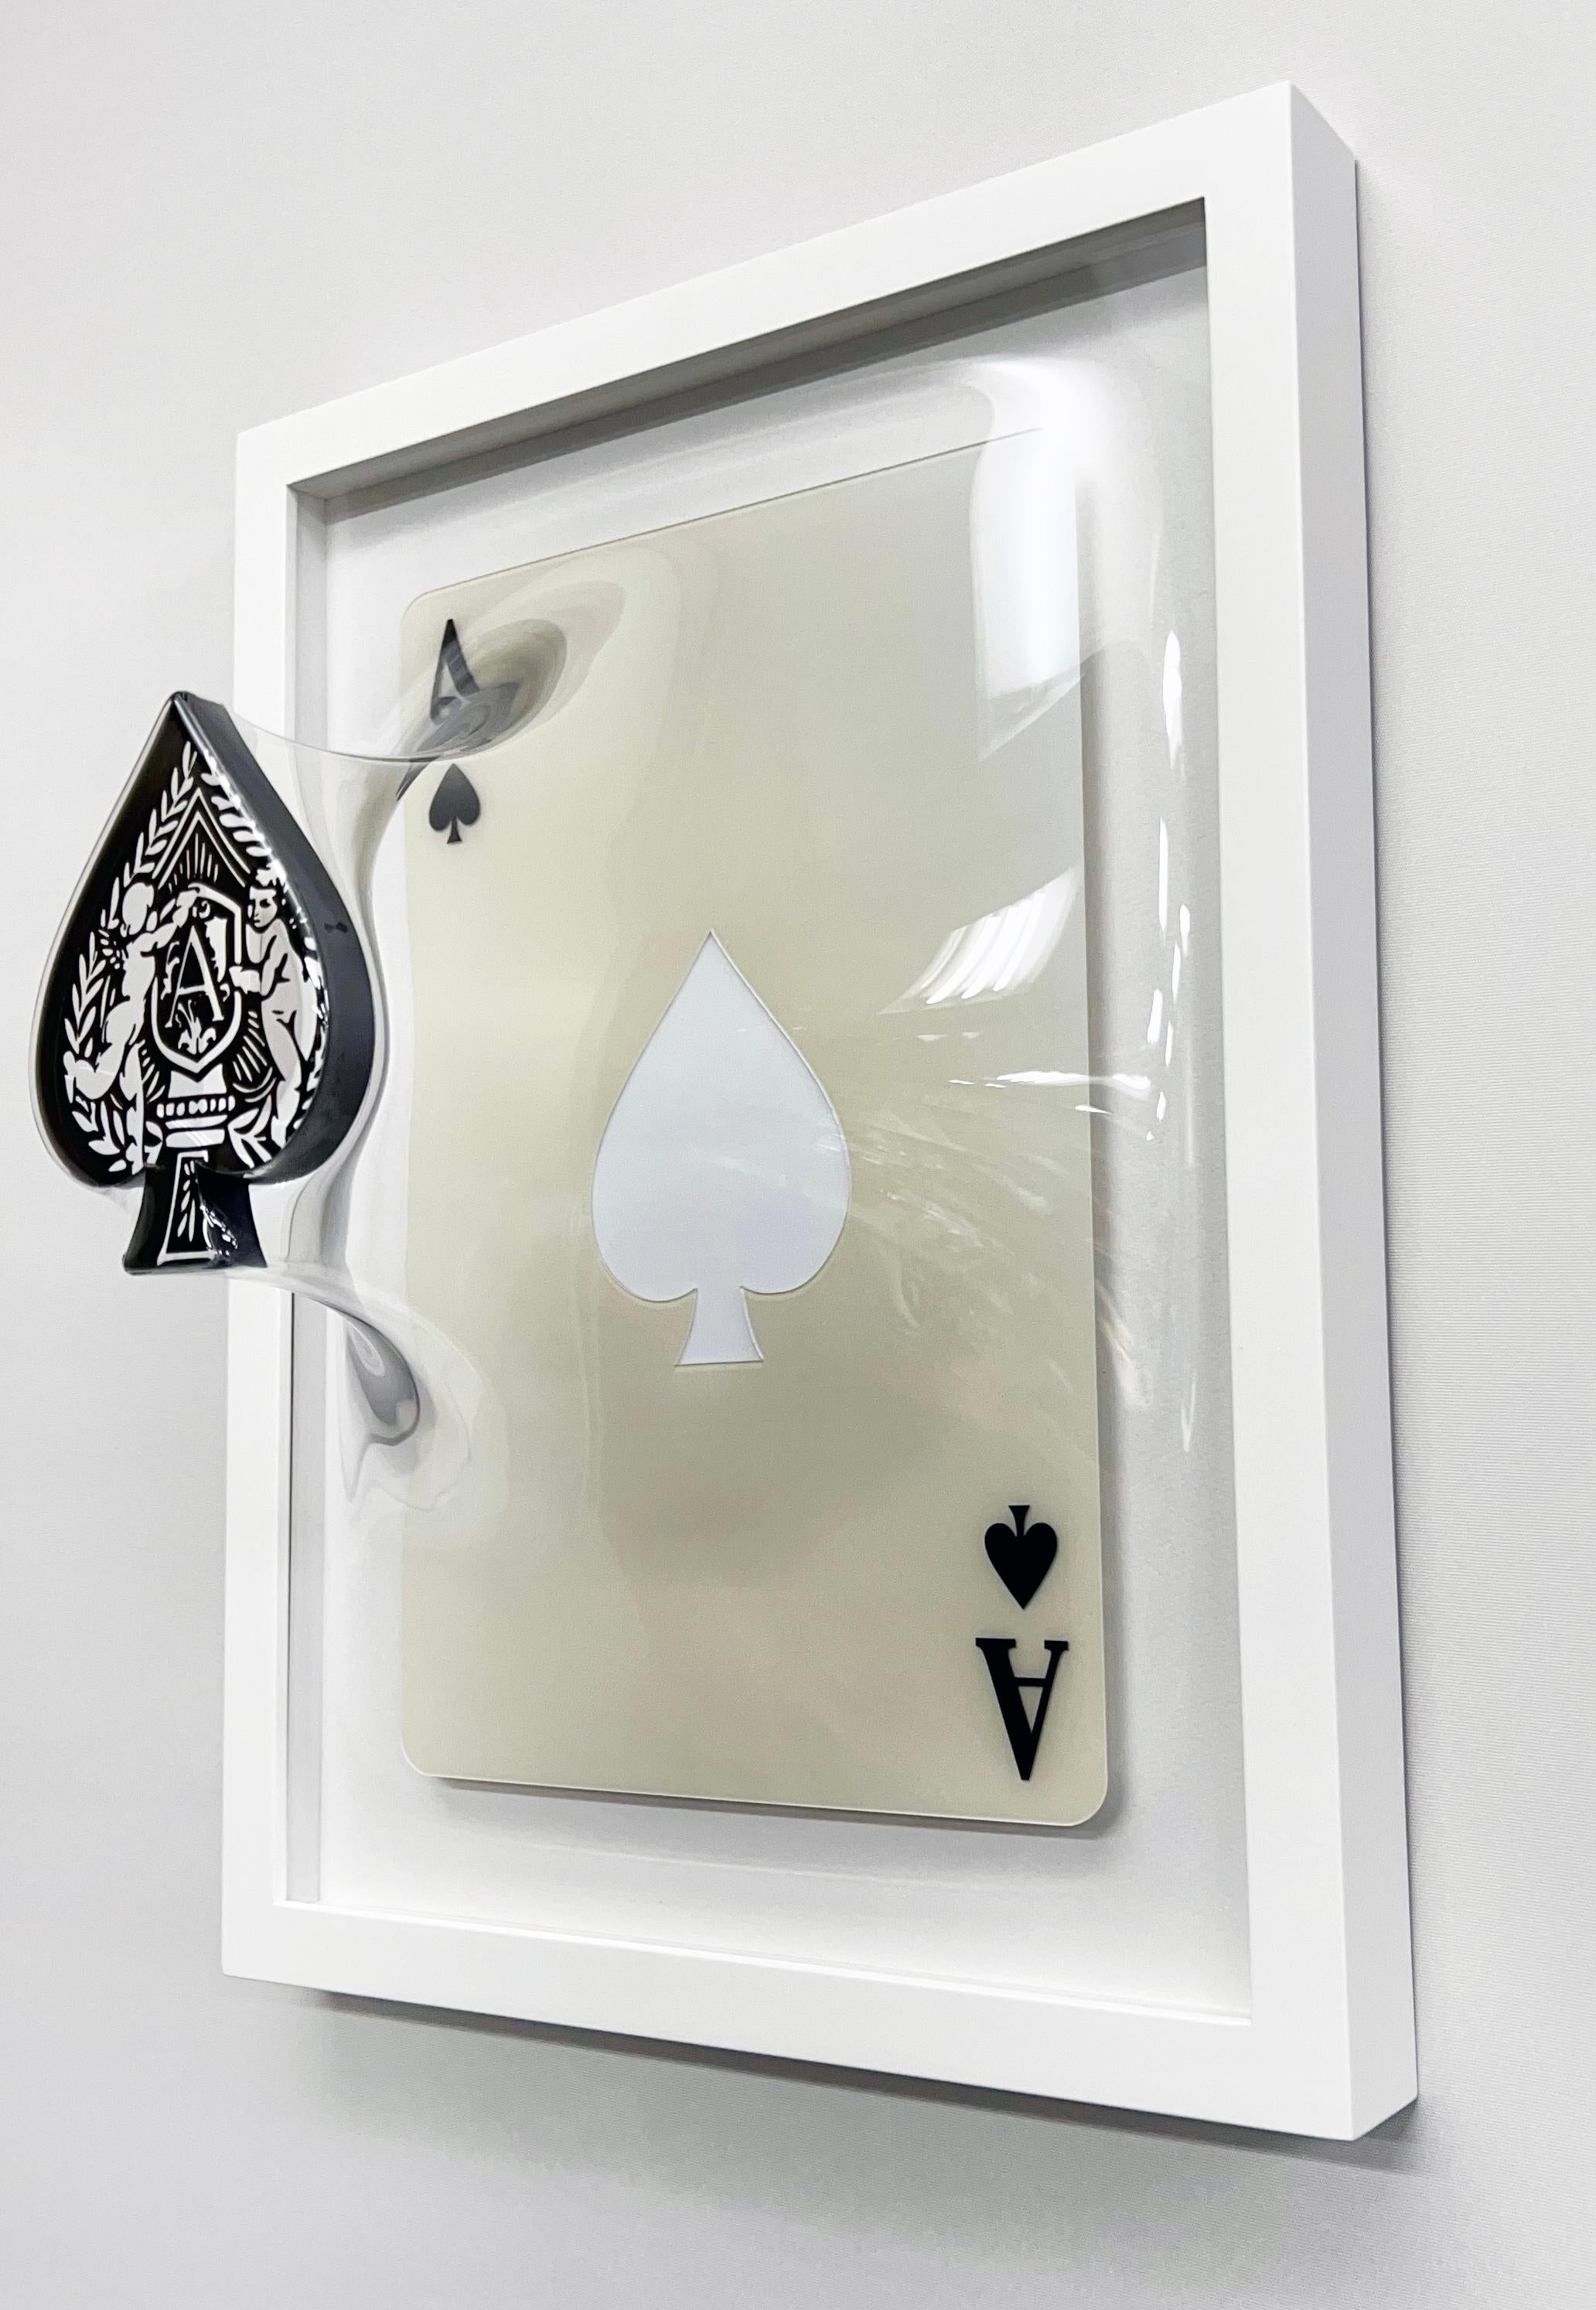 Yuki Matsueda Abstract Painting - "Ace of Spades" contemporary 3-D poker wall sculpture pop art contemporary cards